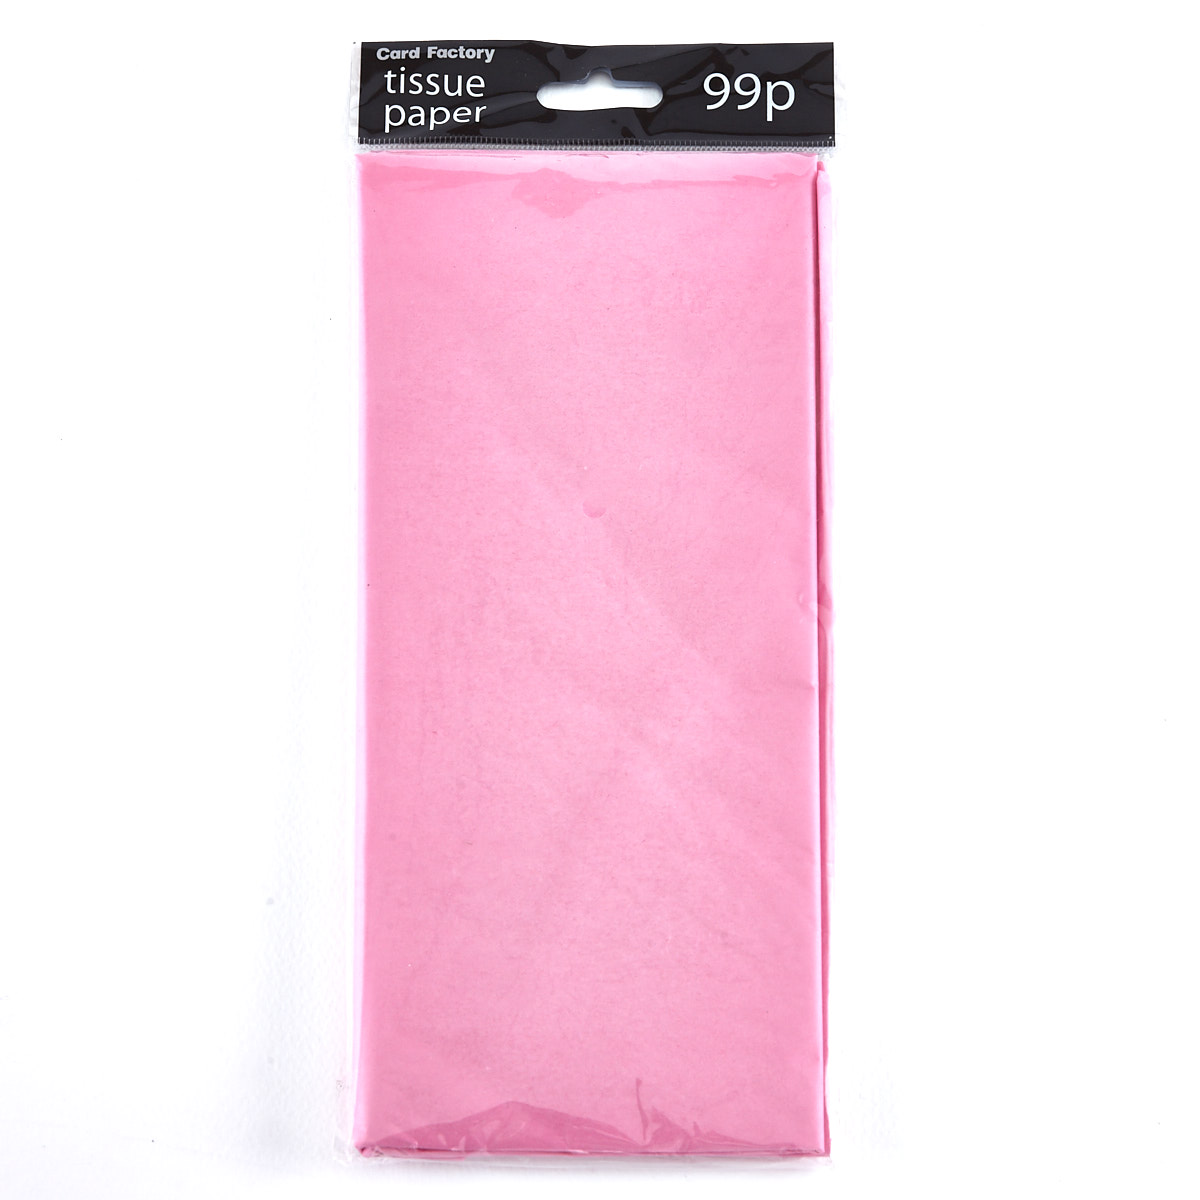 Blush Light Pink Tissue Paper 15 X 20-96 Sheet Pack preimum Quality Tissue Paper Made in USA 